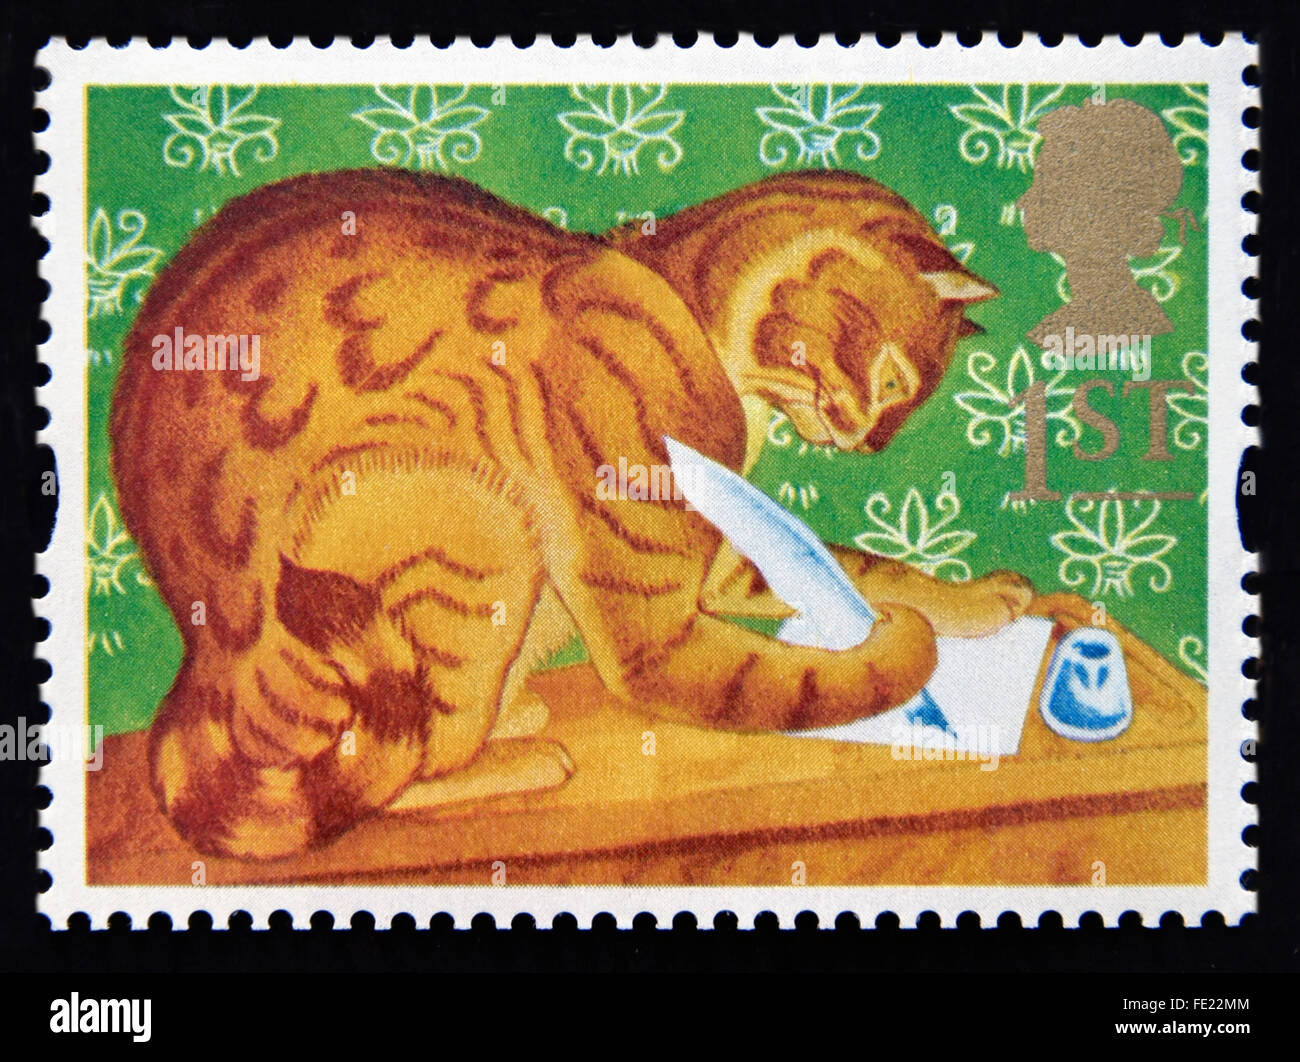 Postage stamp. Great Britain. Queen Elizabeth II. 1994. Greetings stamps. 'Messages'. Orlando the Marmalade Cat.1st. Stock Photo